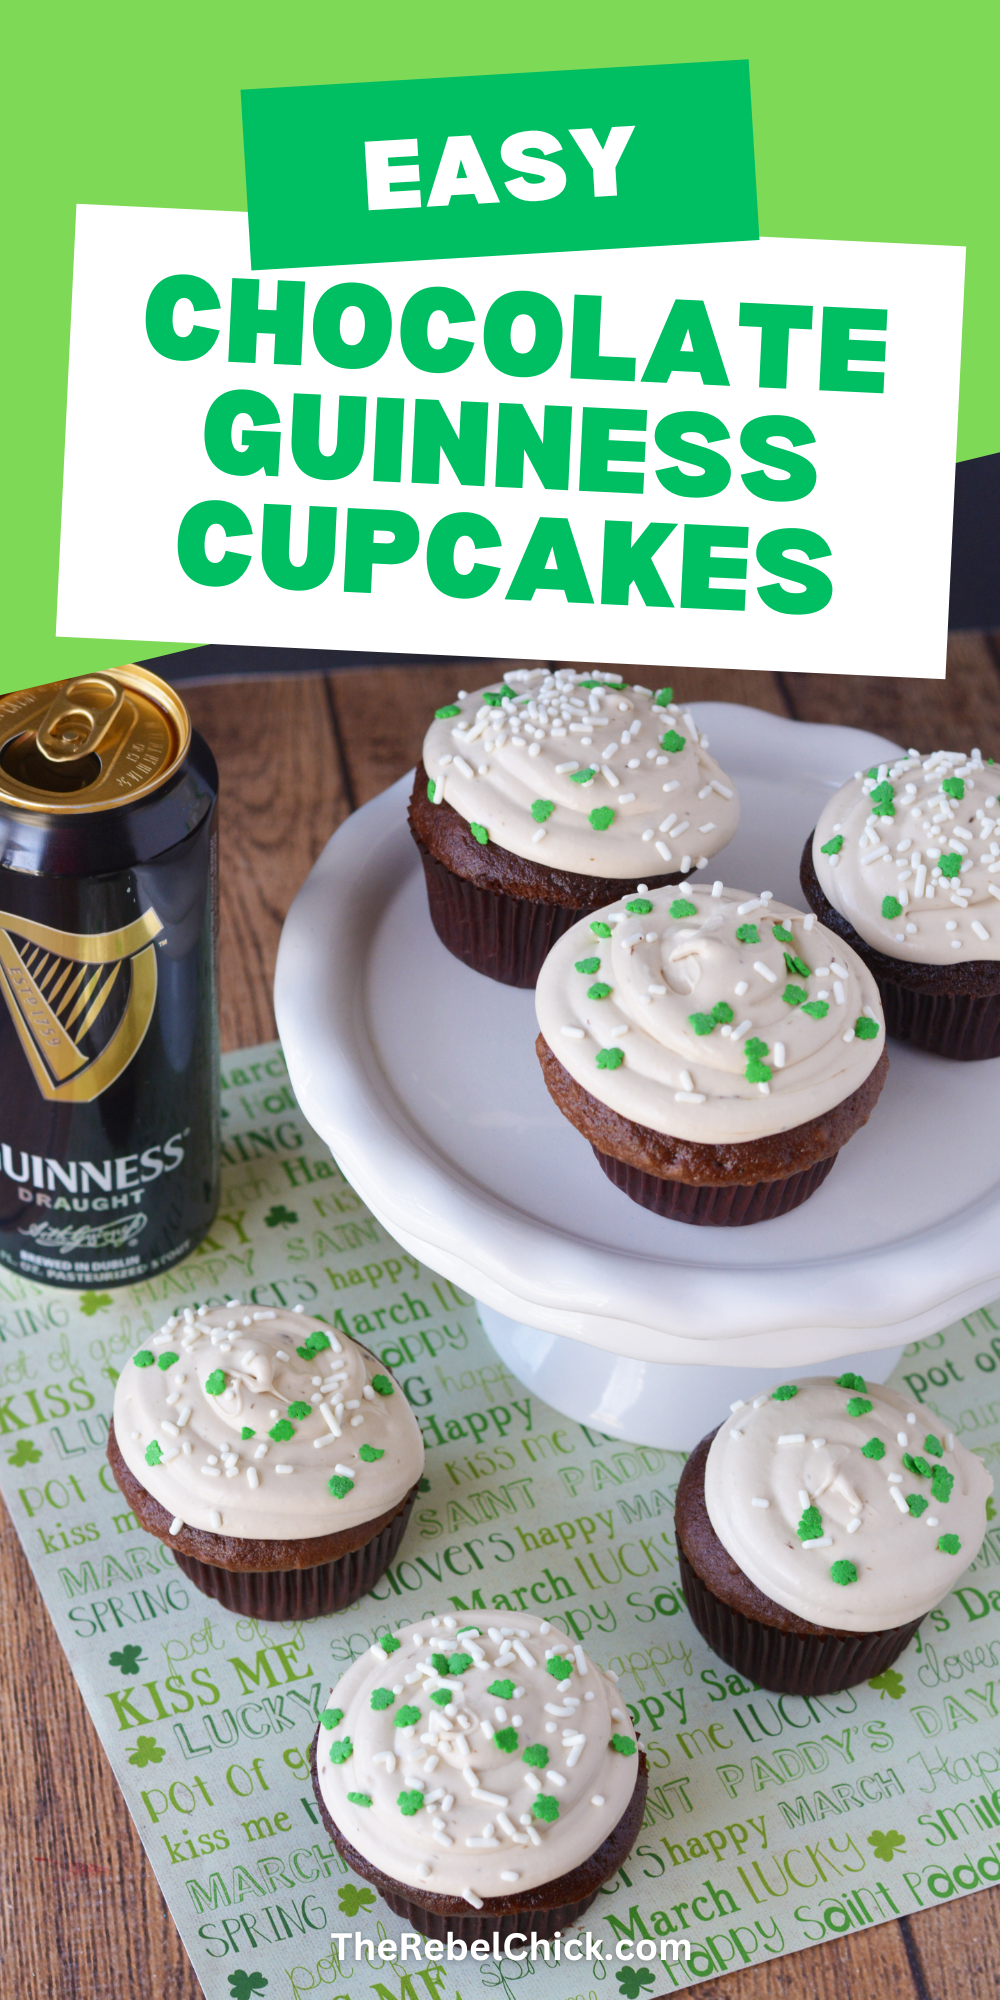 Saint Patrick's Day Chocolate Guinness Frosted Cupcakes Recipe